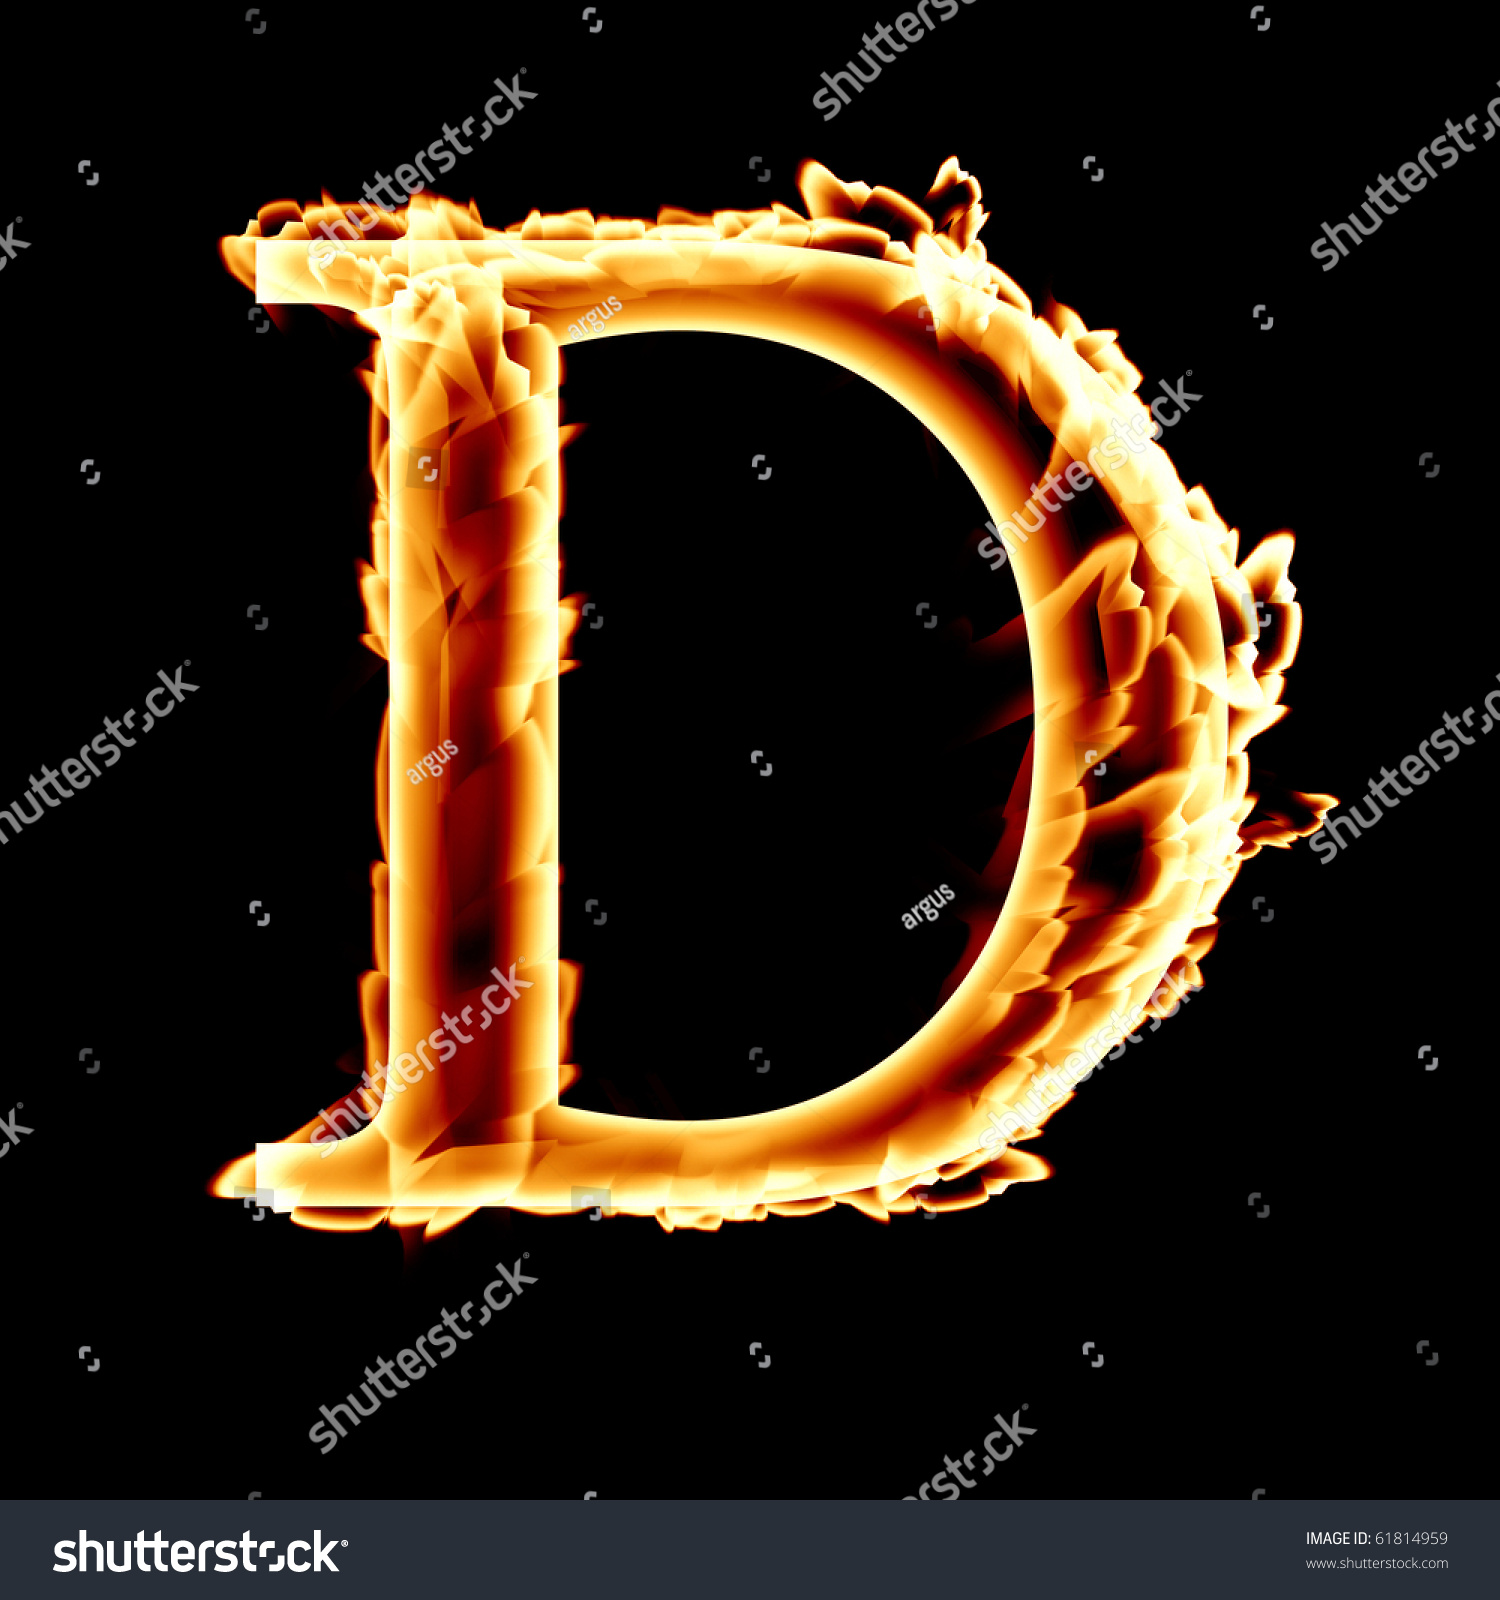 Fire Font: Letter D On A Dark Background Stock Photo 61814959 ...